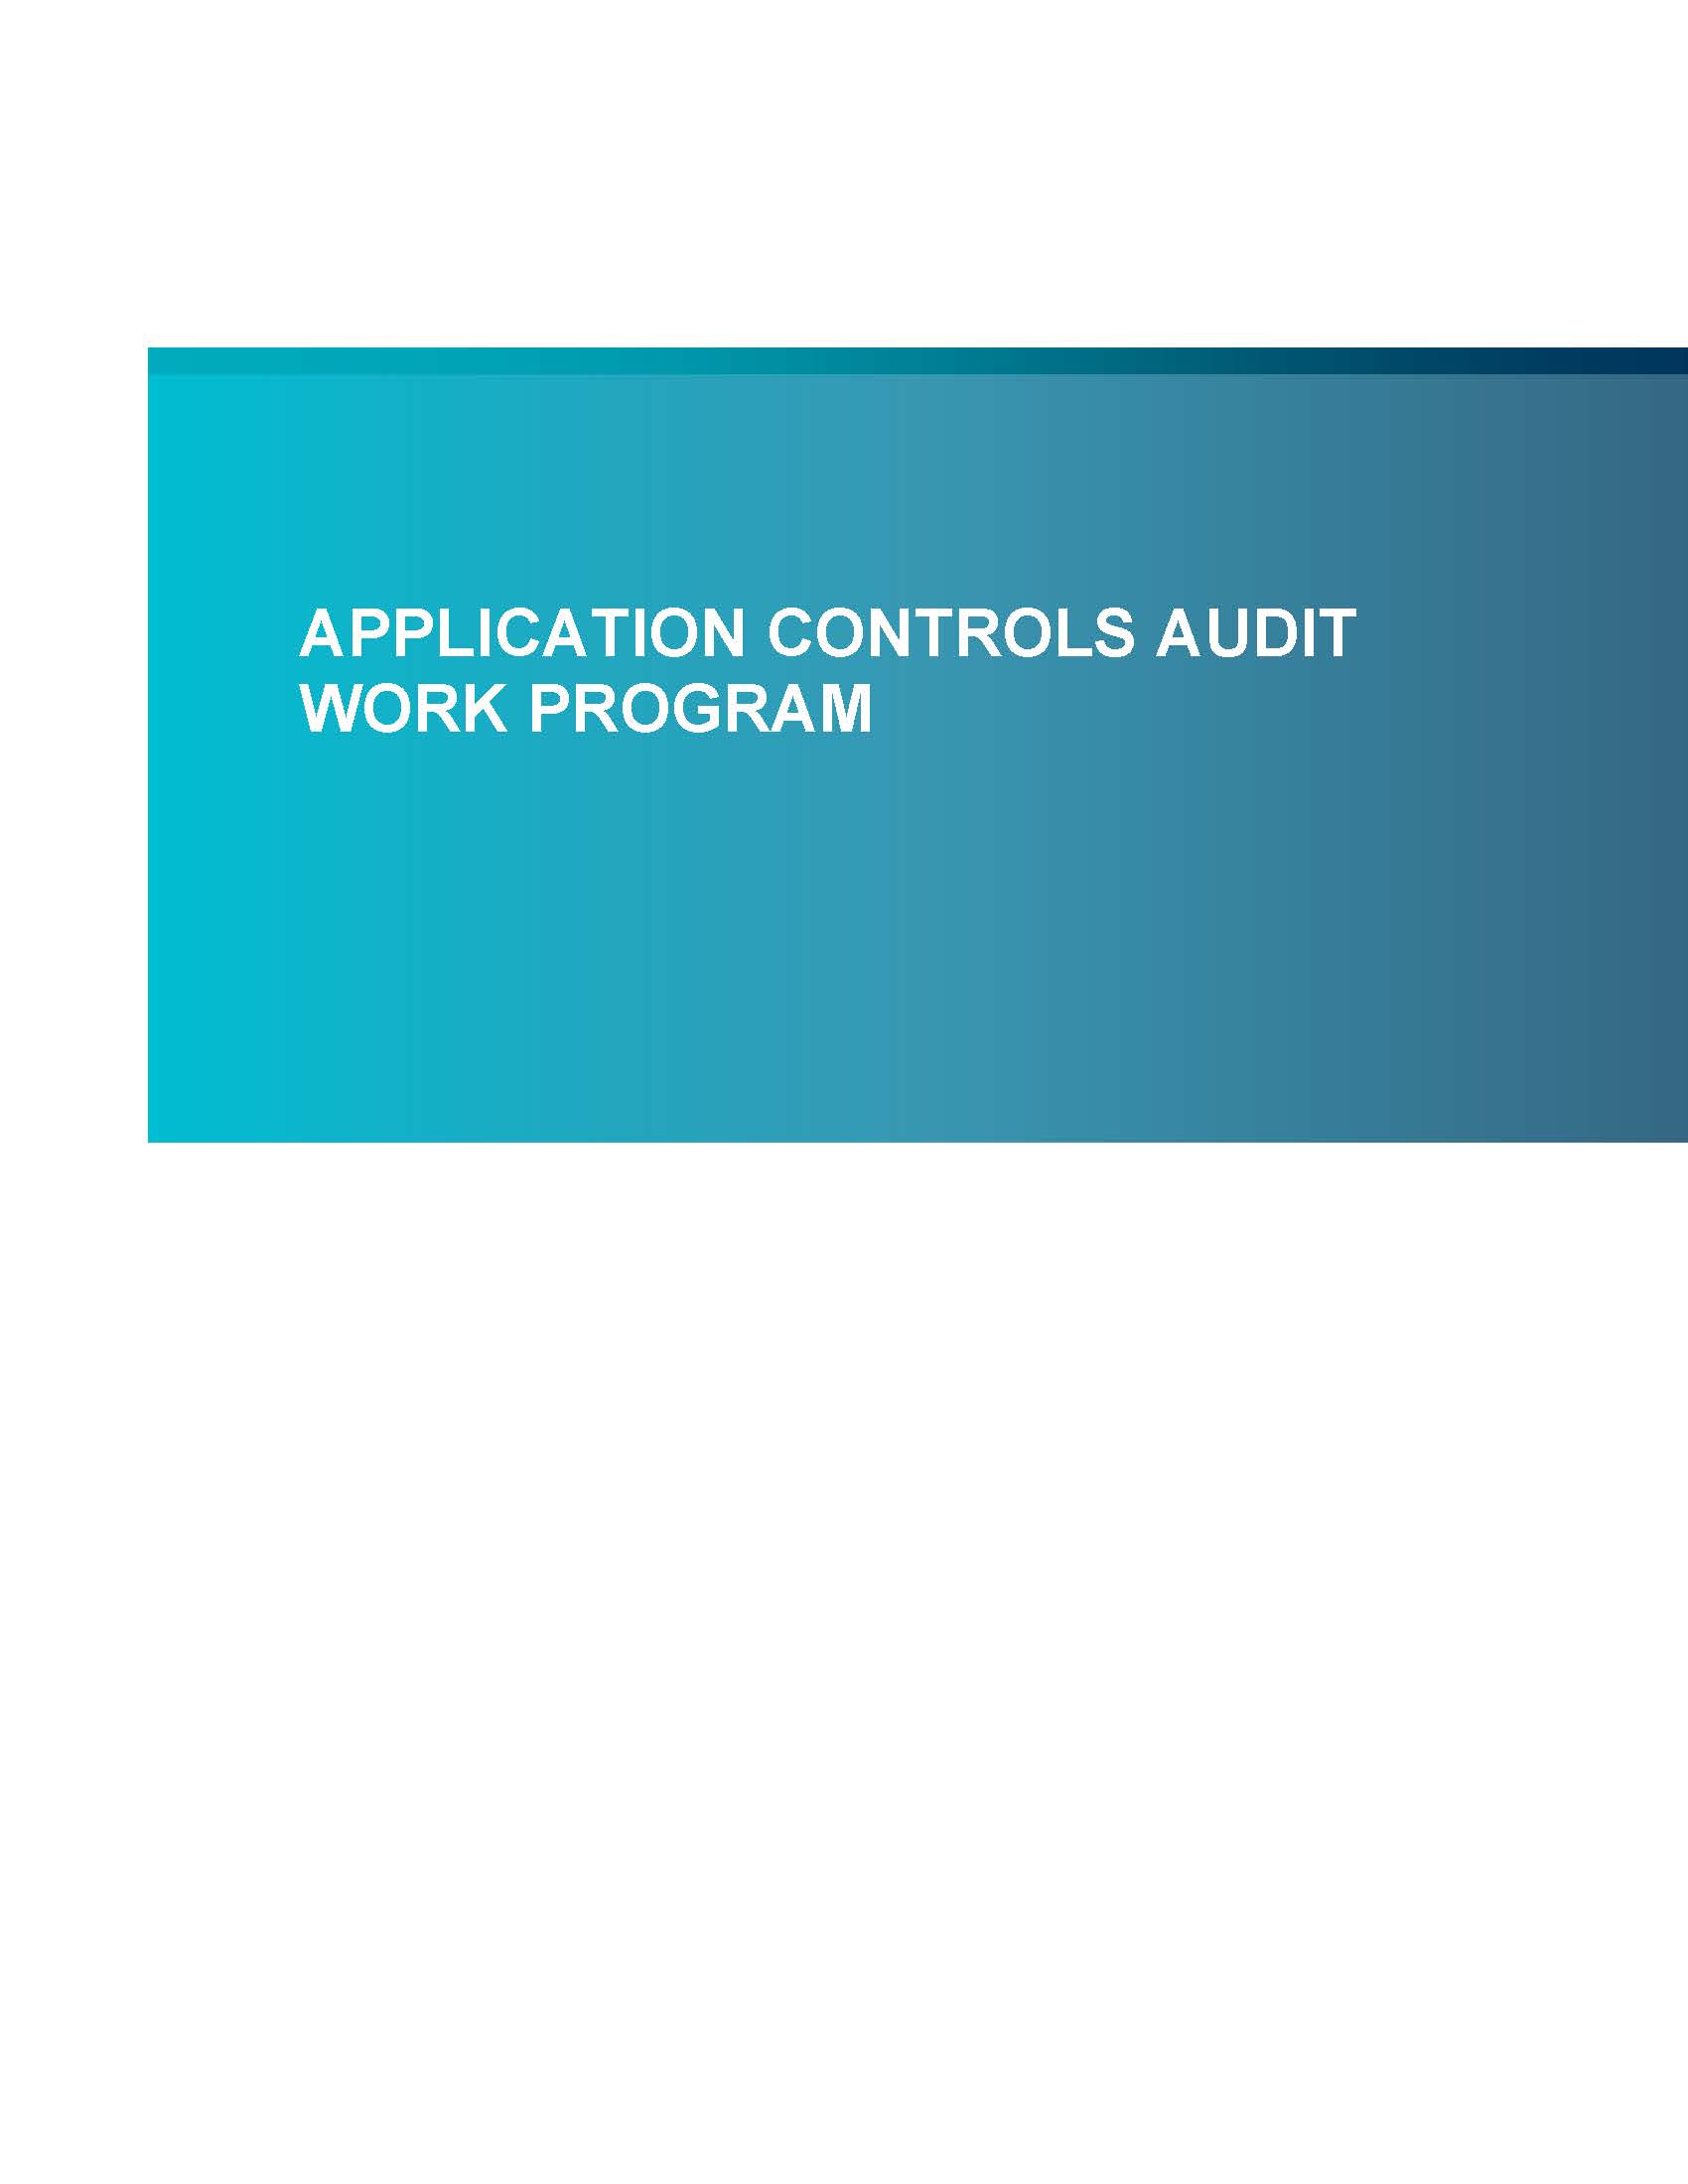 Screenshot of the first page of Application Controls Audit Work Program